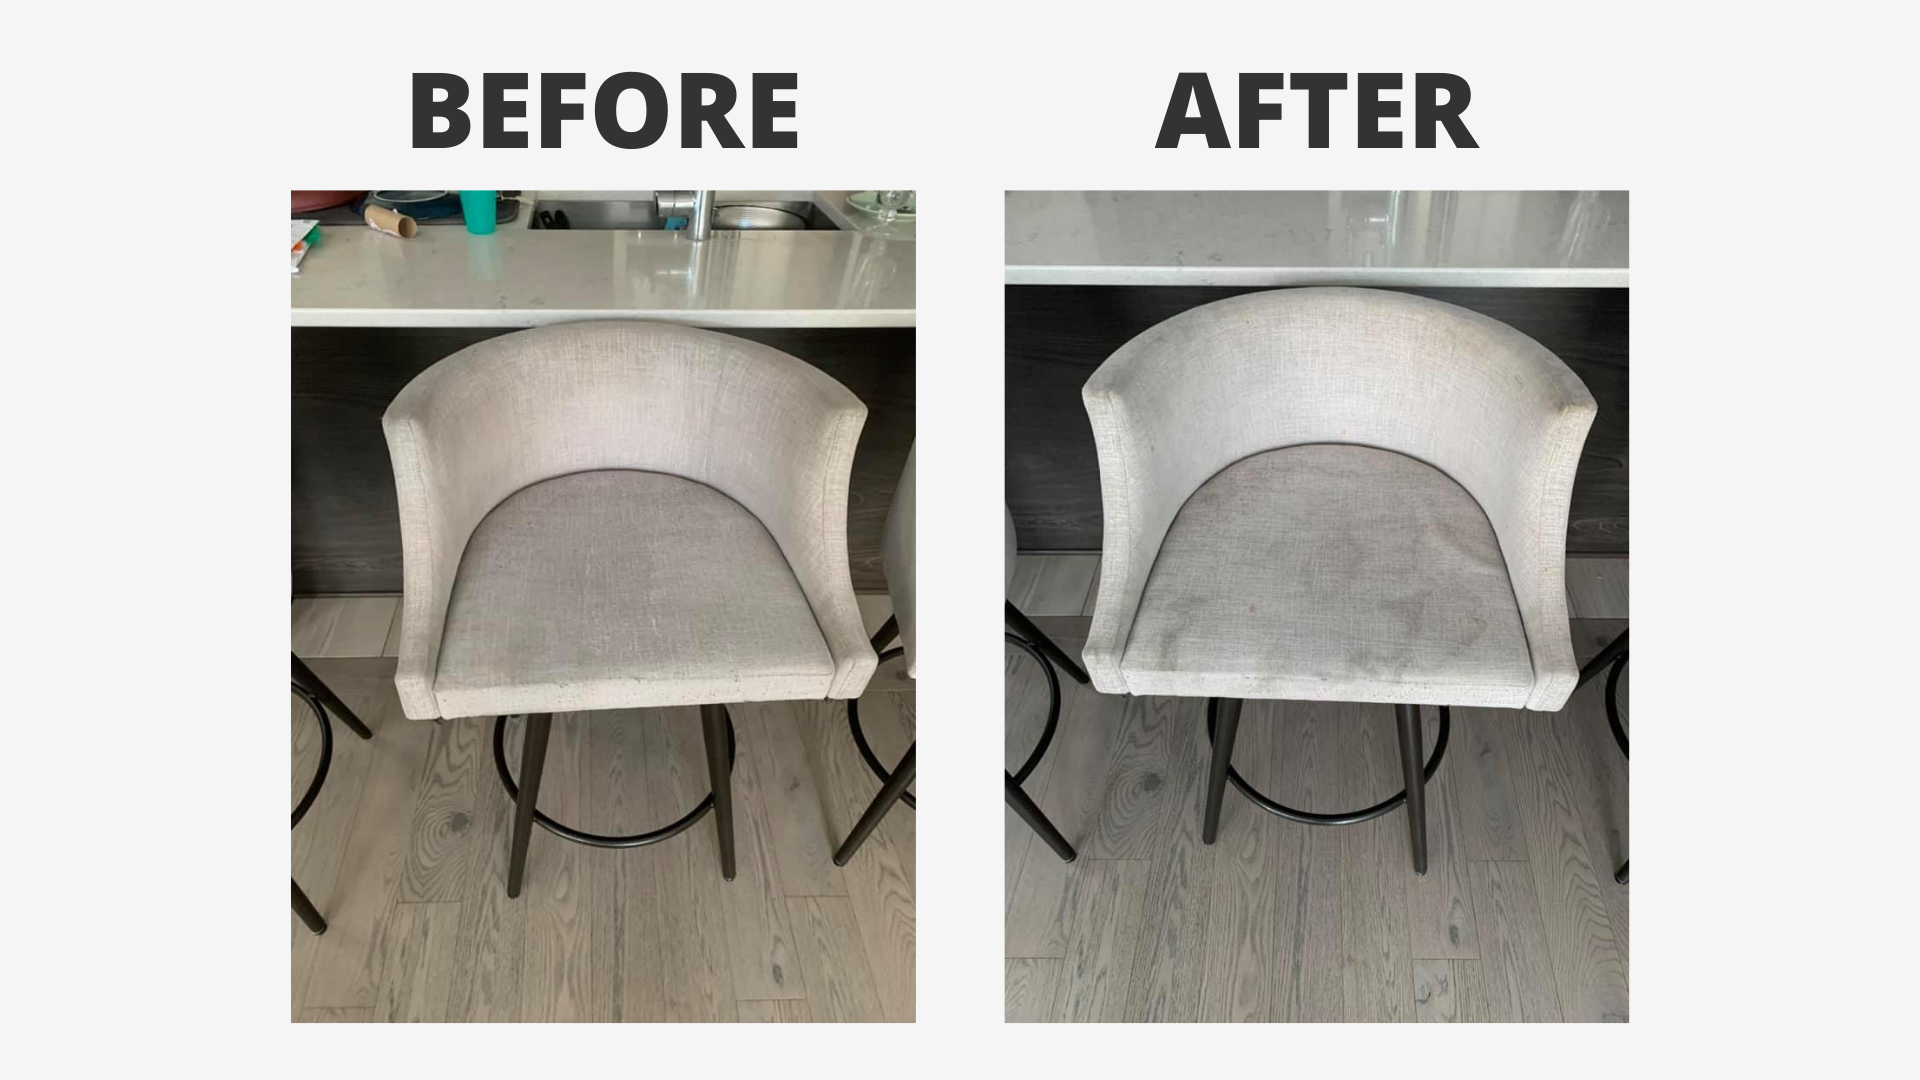 white chair before and after being cleaned